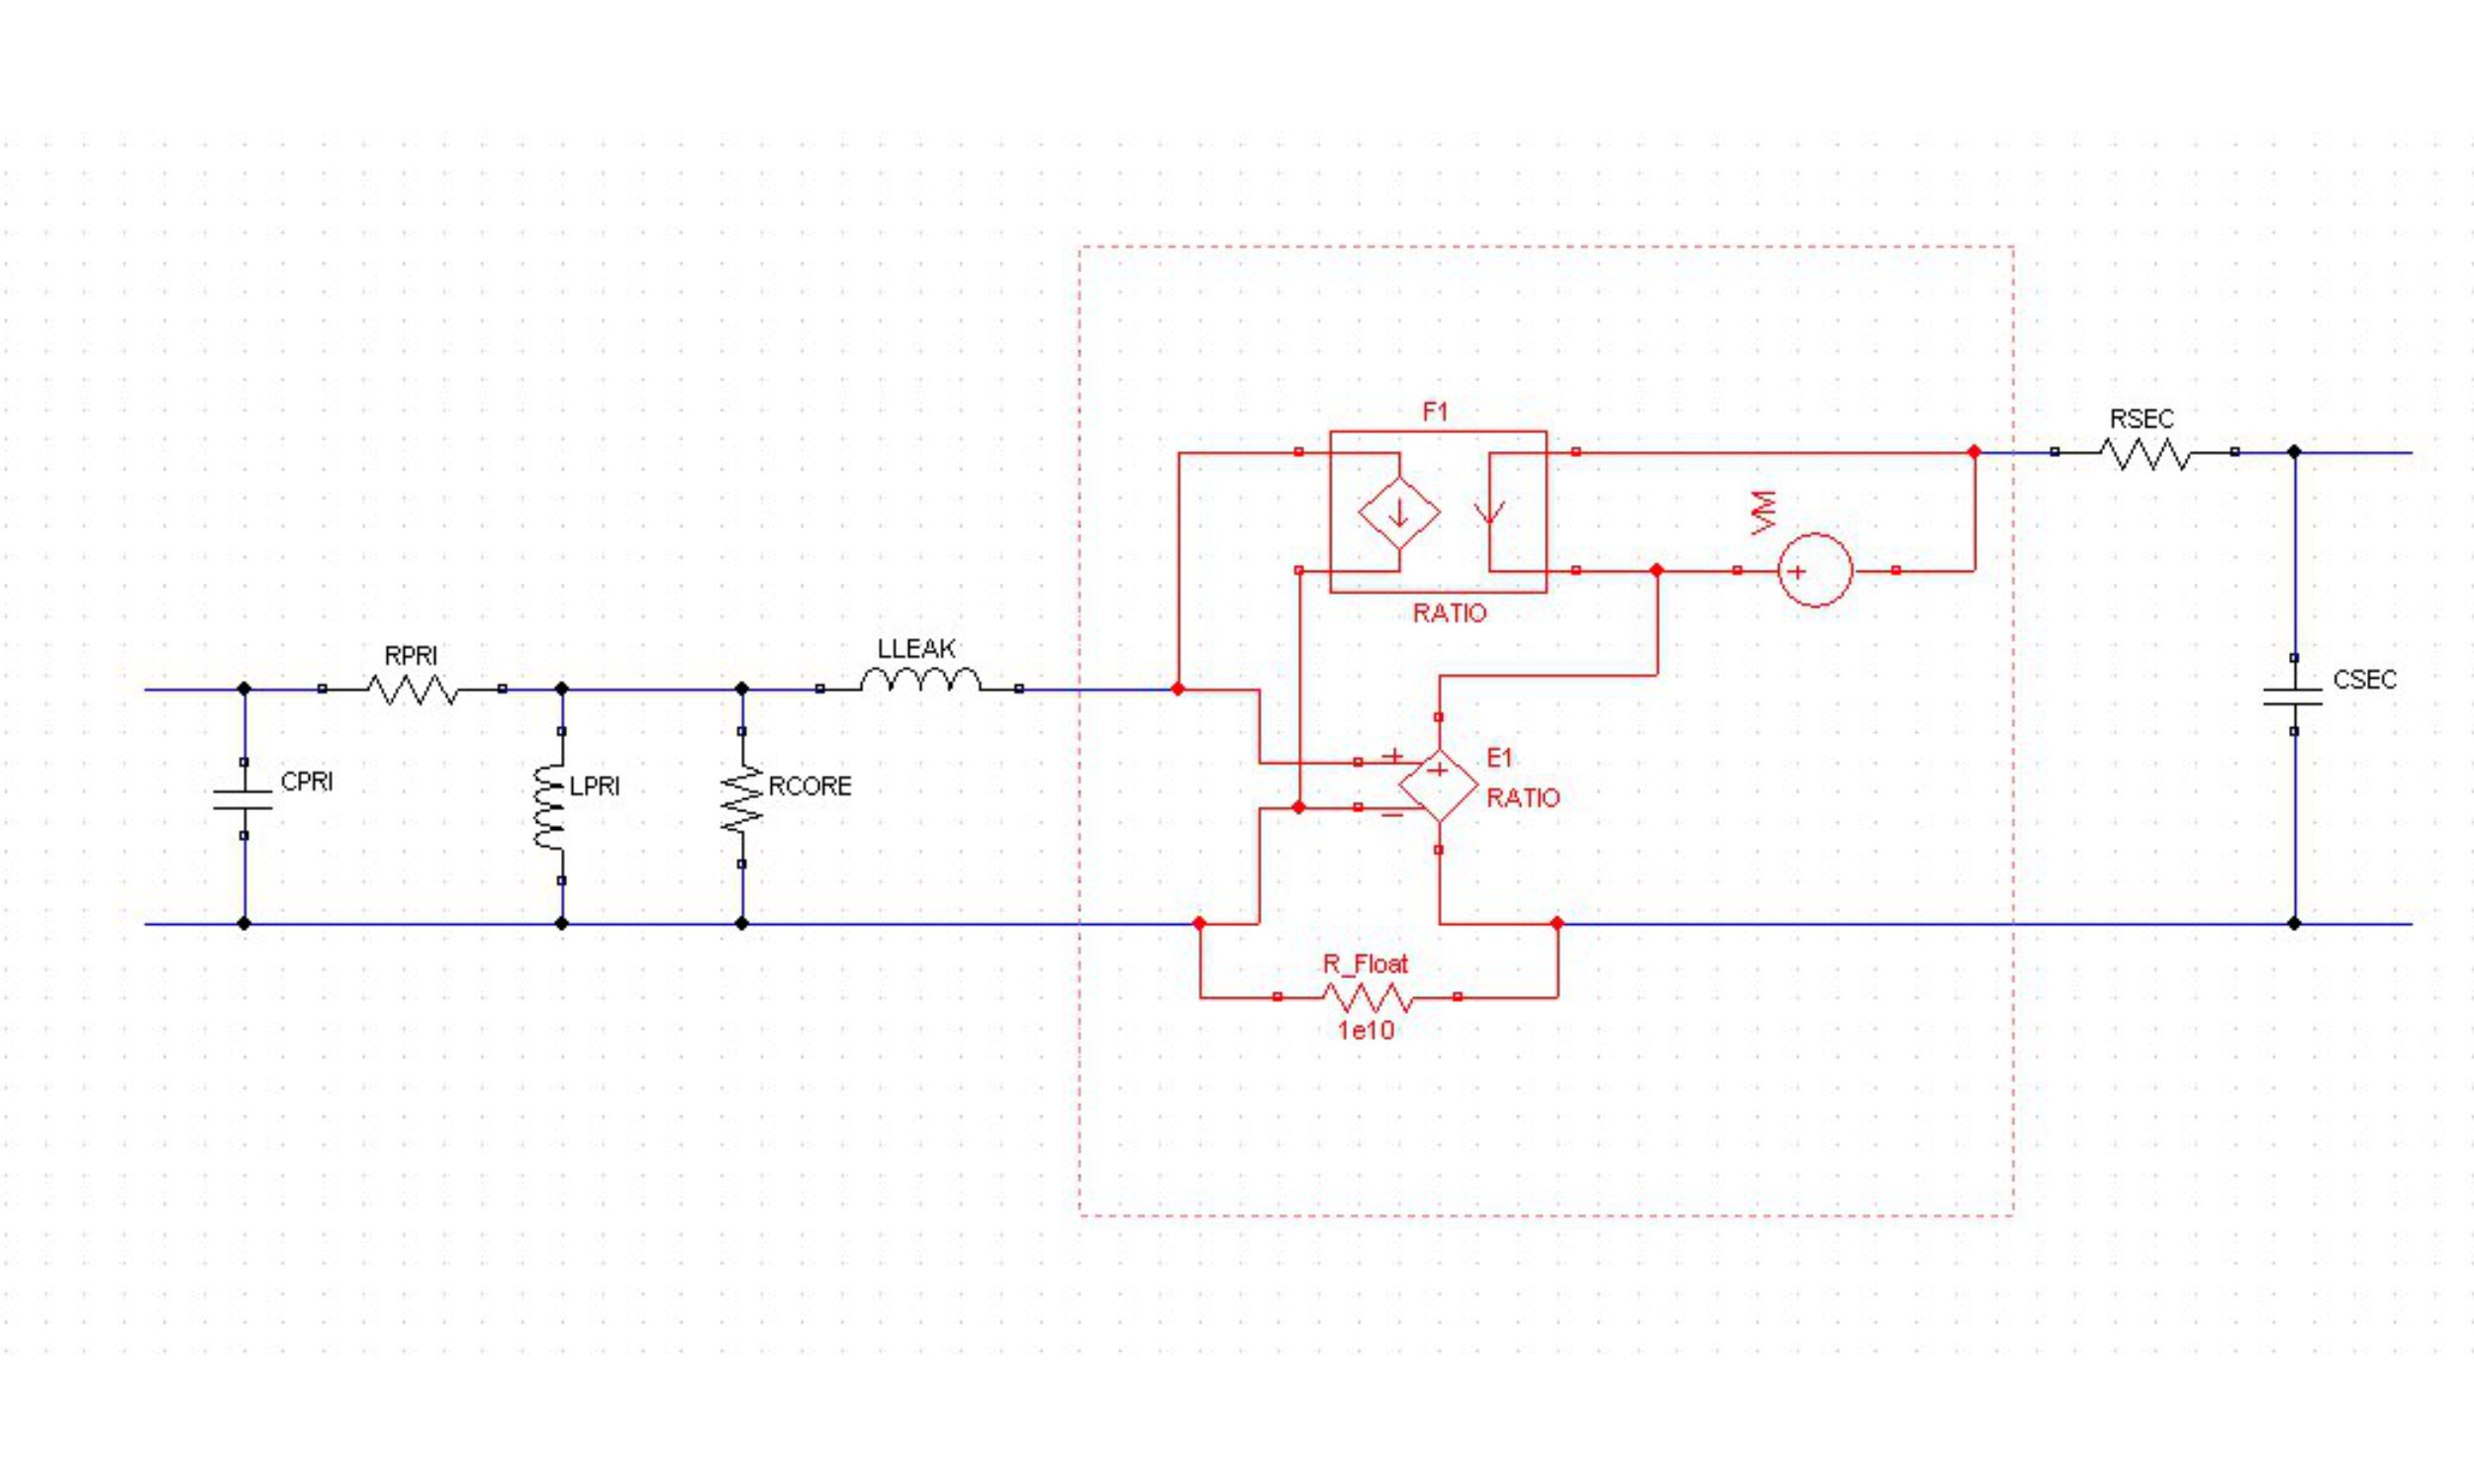  Here is a SPICE model including AC coupling of an input signal, end-of-line termination, an impressed DC voltage for instrument power, and the lowpass and comparator circuits for pulse train recovery on the receive side. 